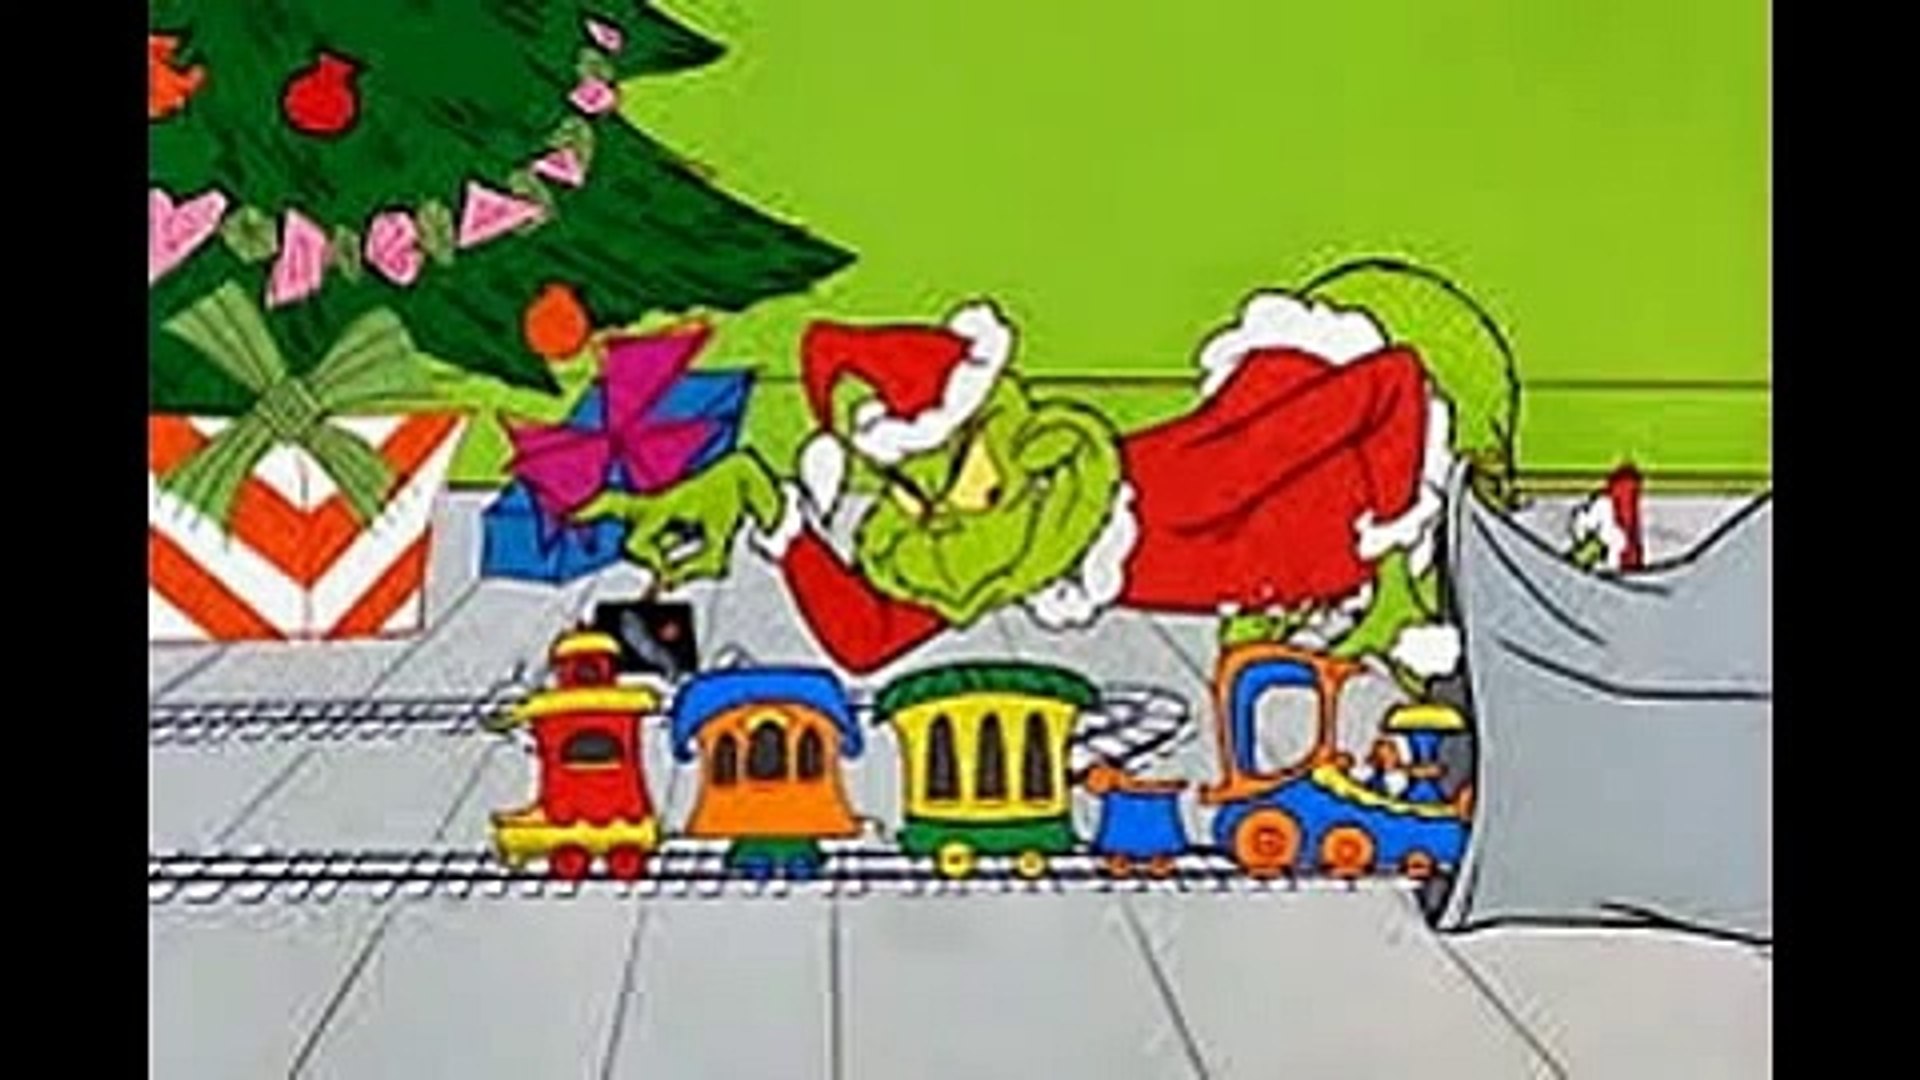 How The Grinch Stole Christmas Cartoon - video Dailymotion